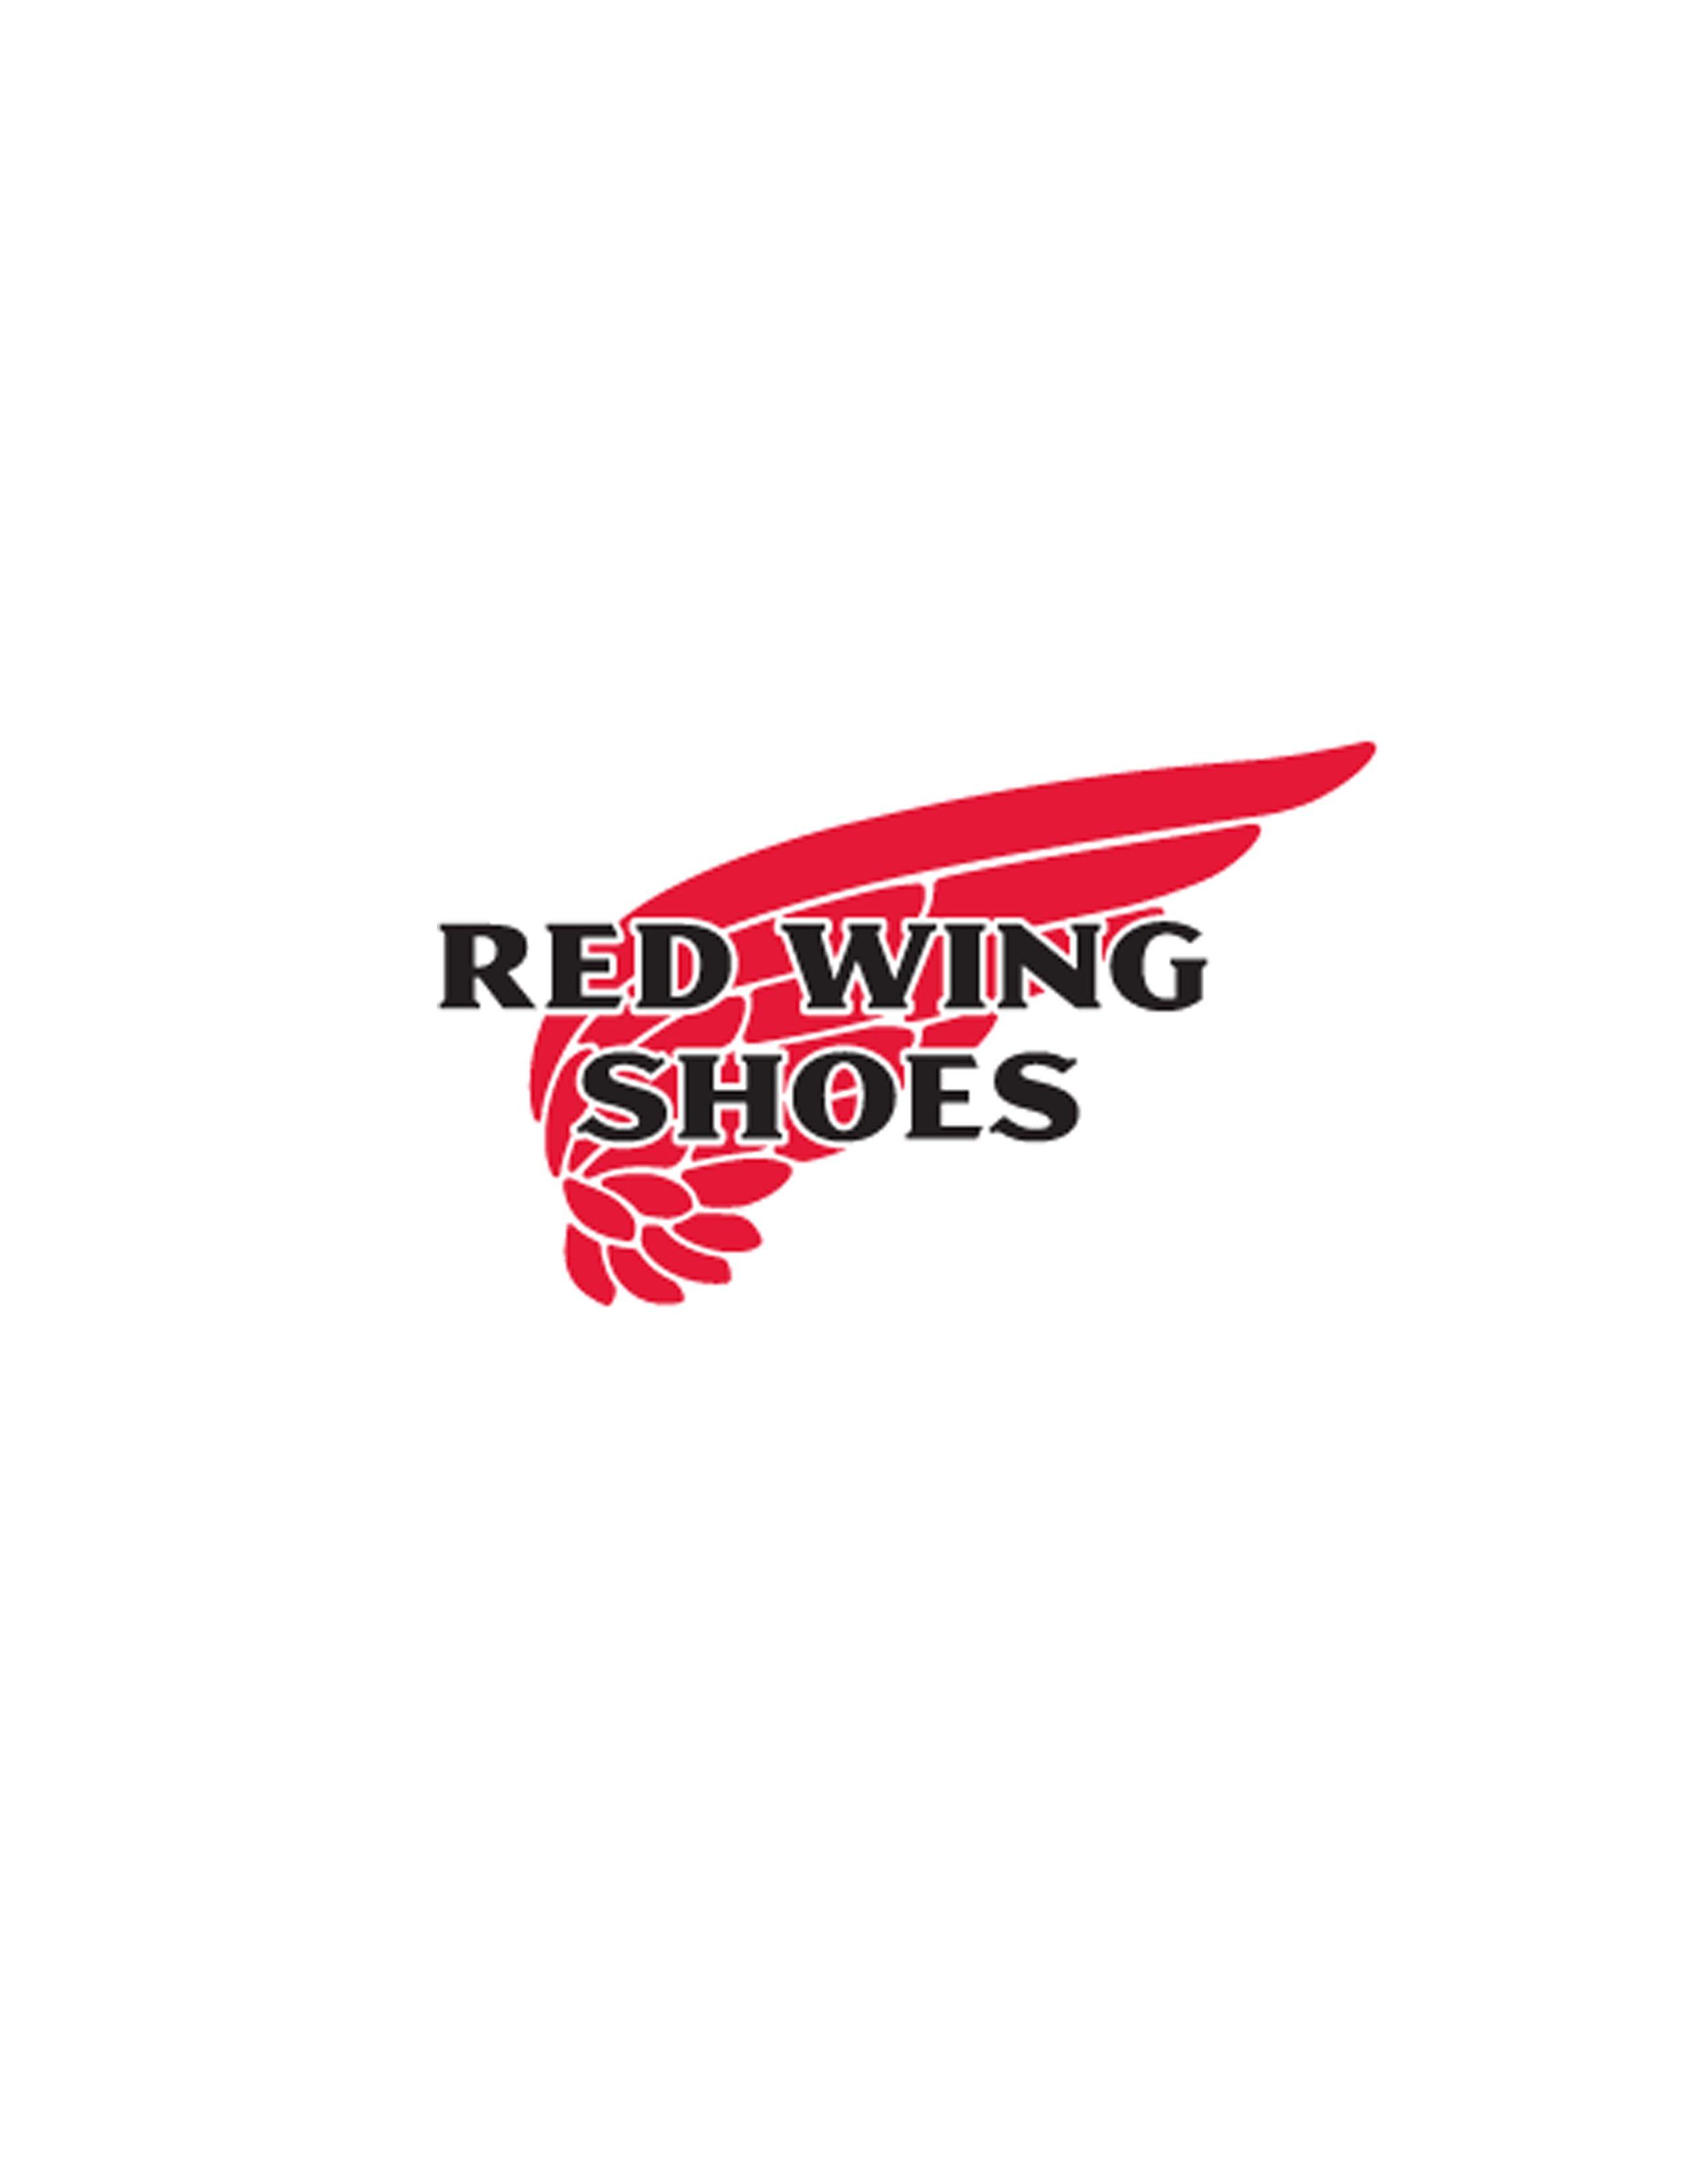 Red Wing Boots Logo - Red wing shoes Logos